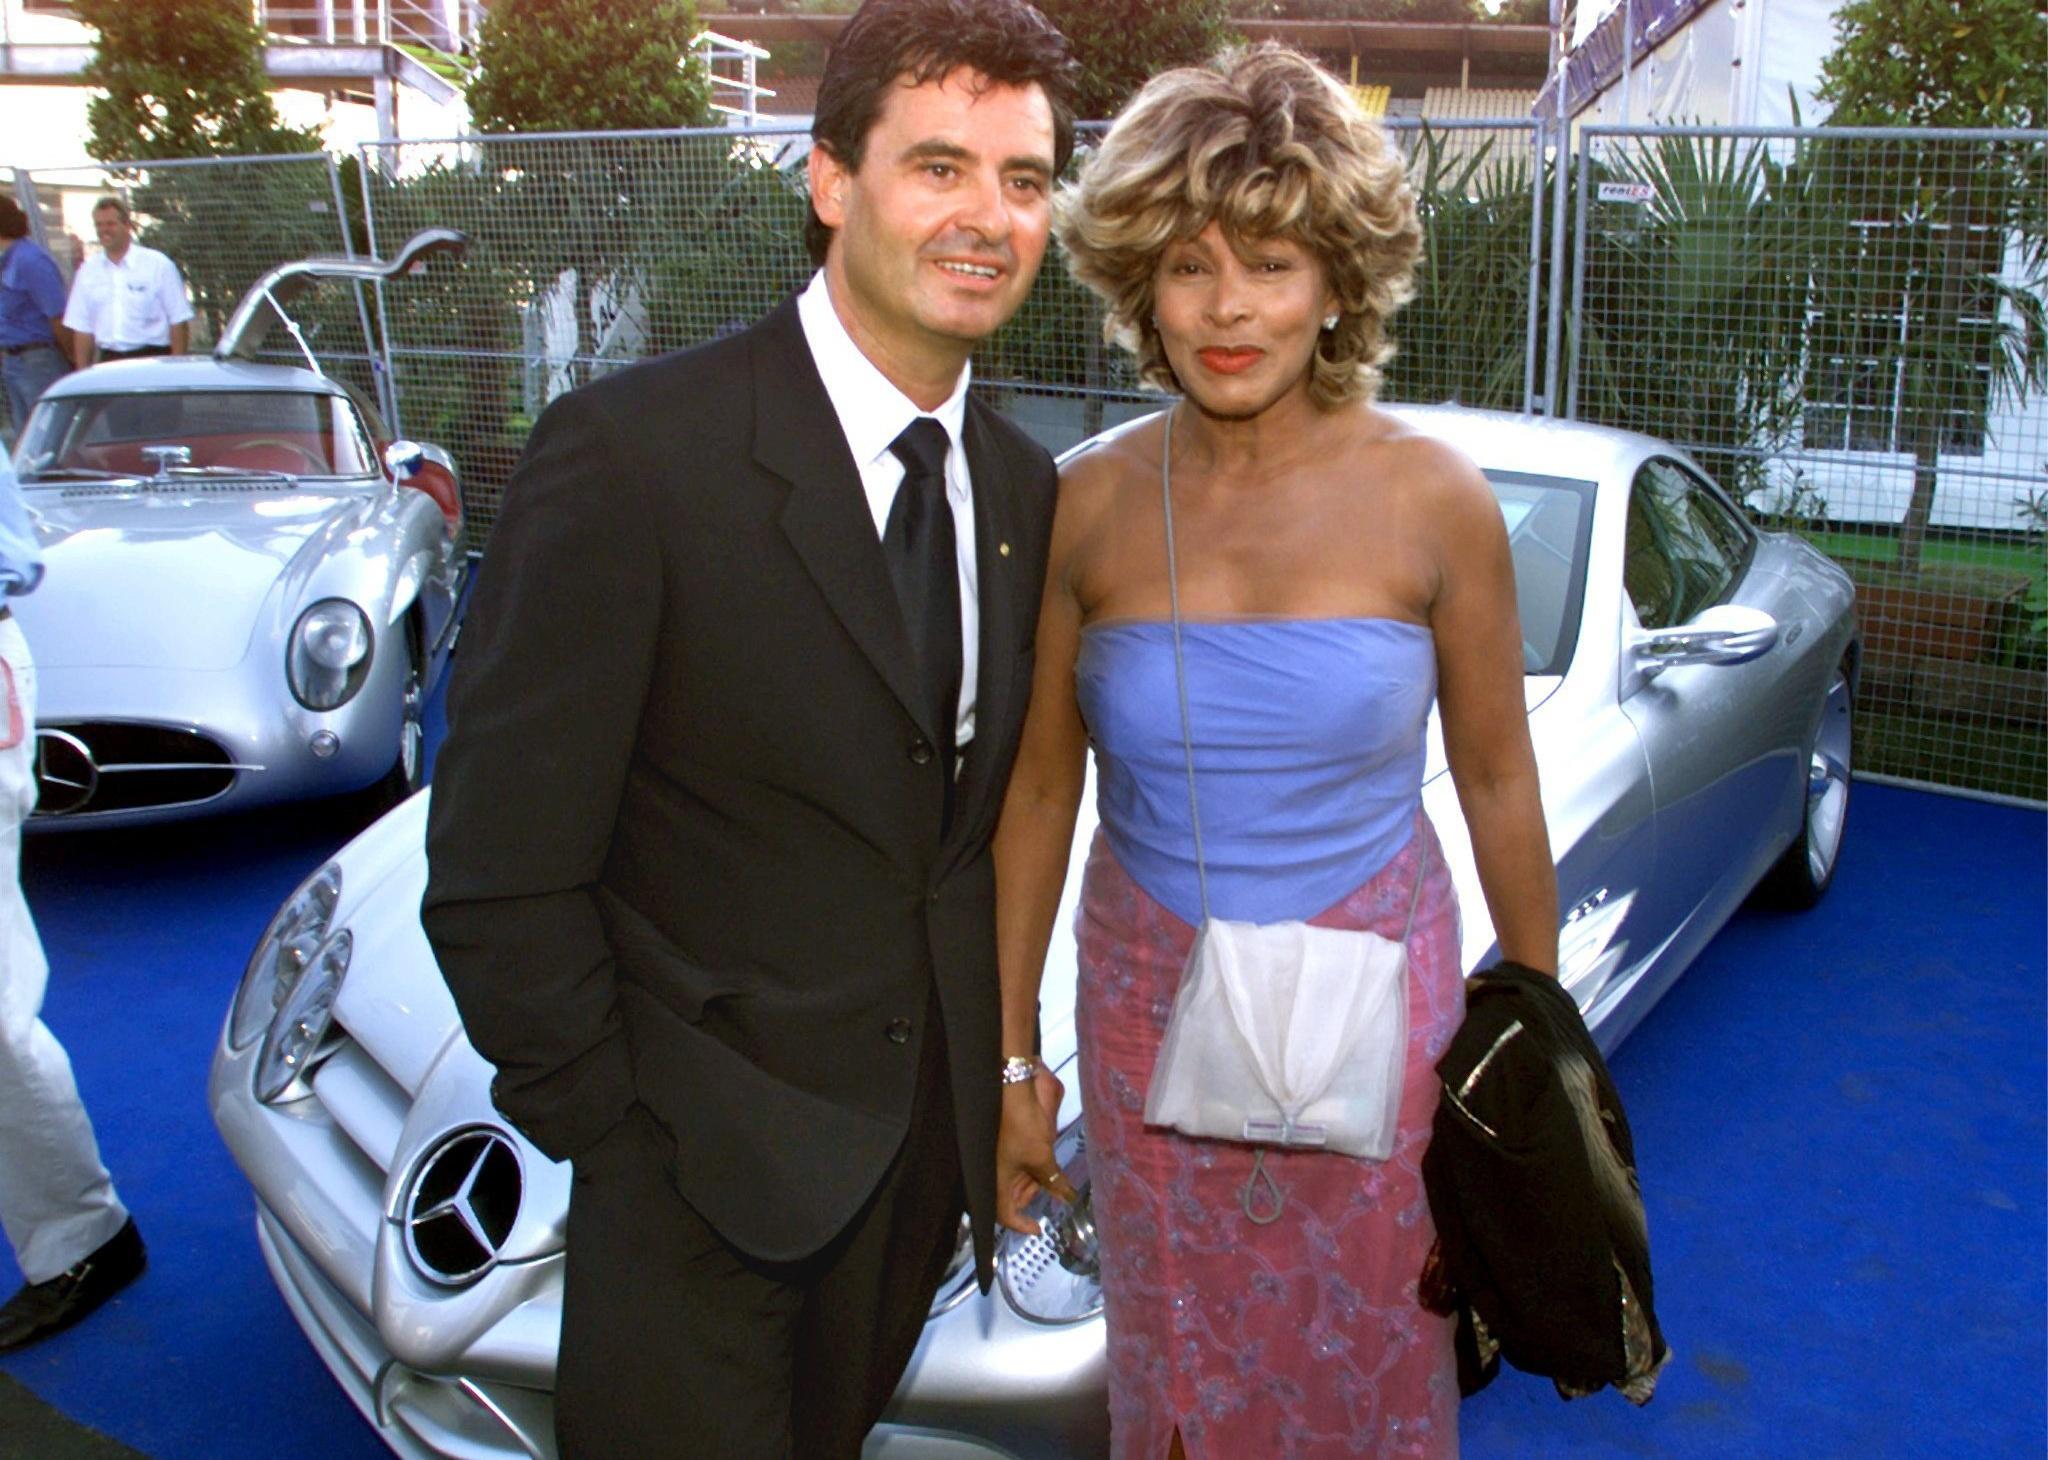 Tina Turner and Erwin Bach before an event.